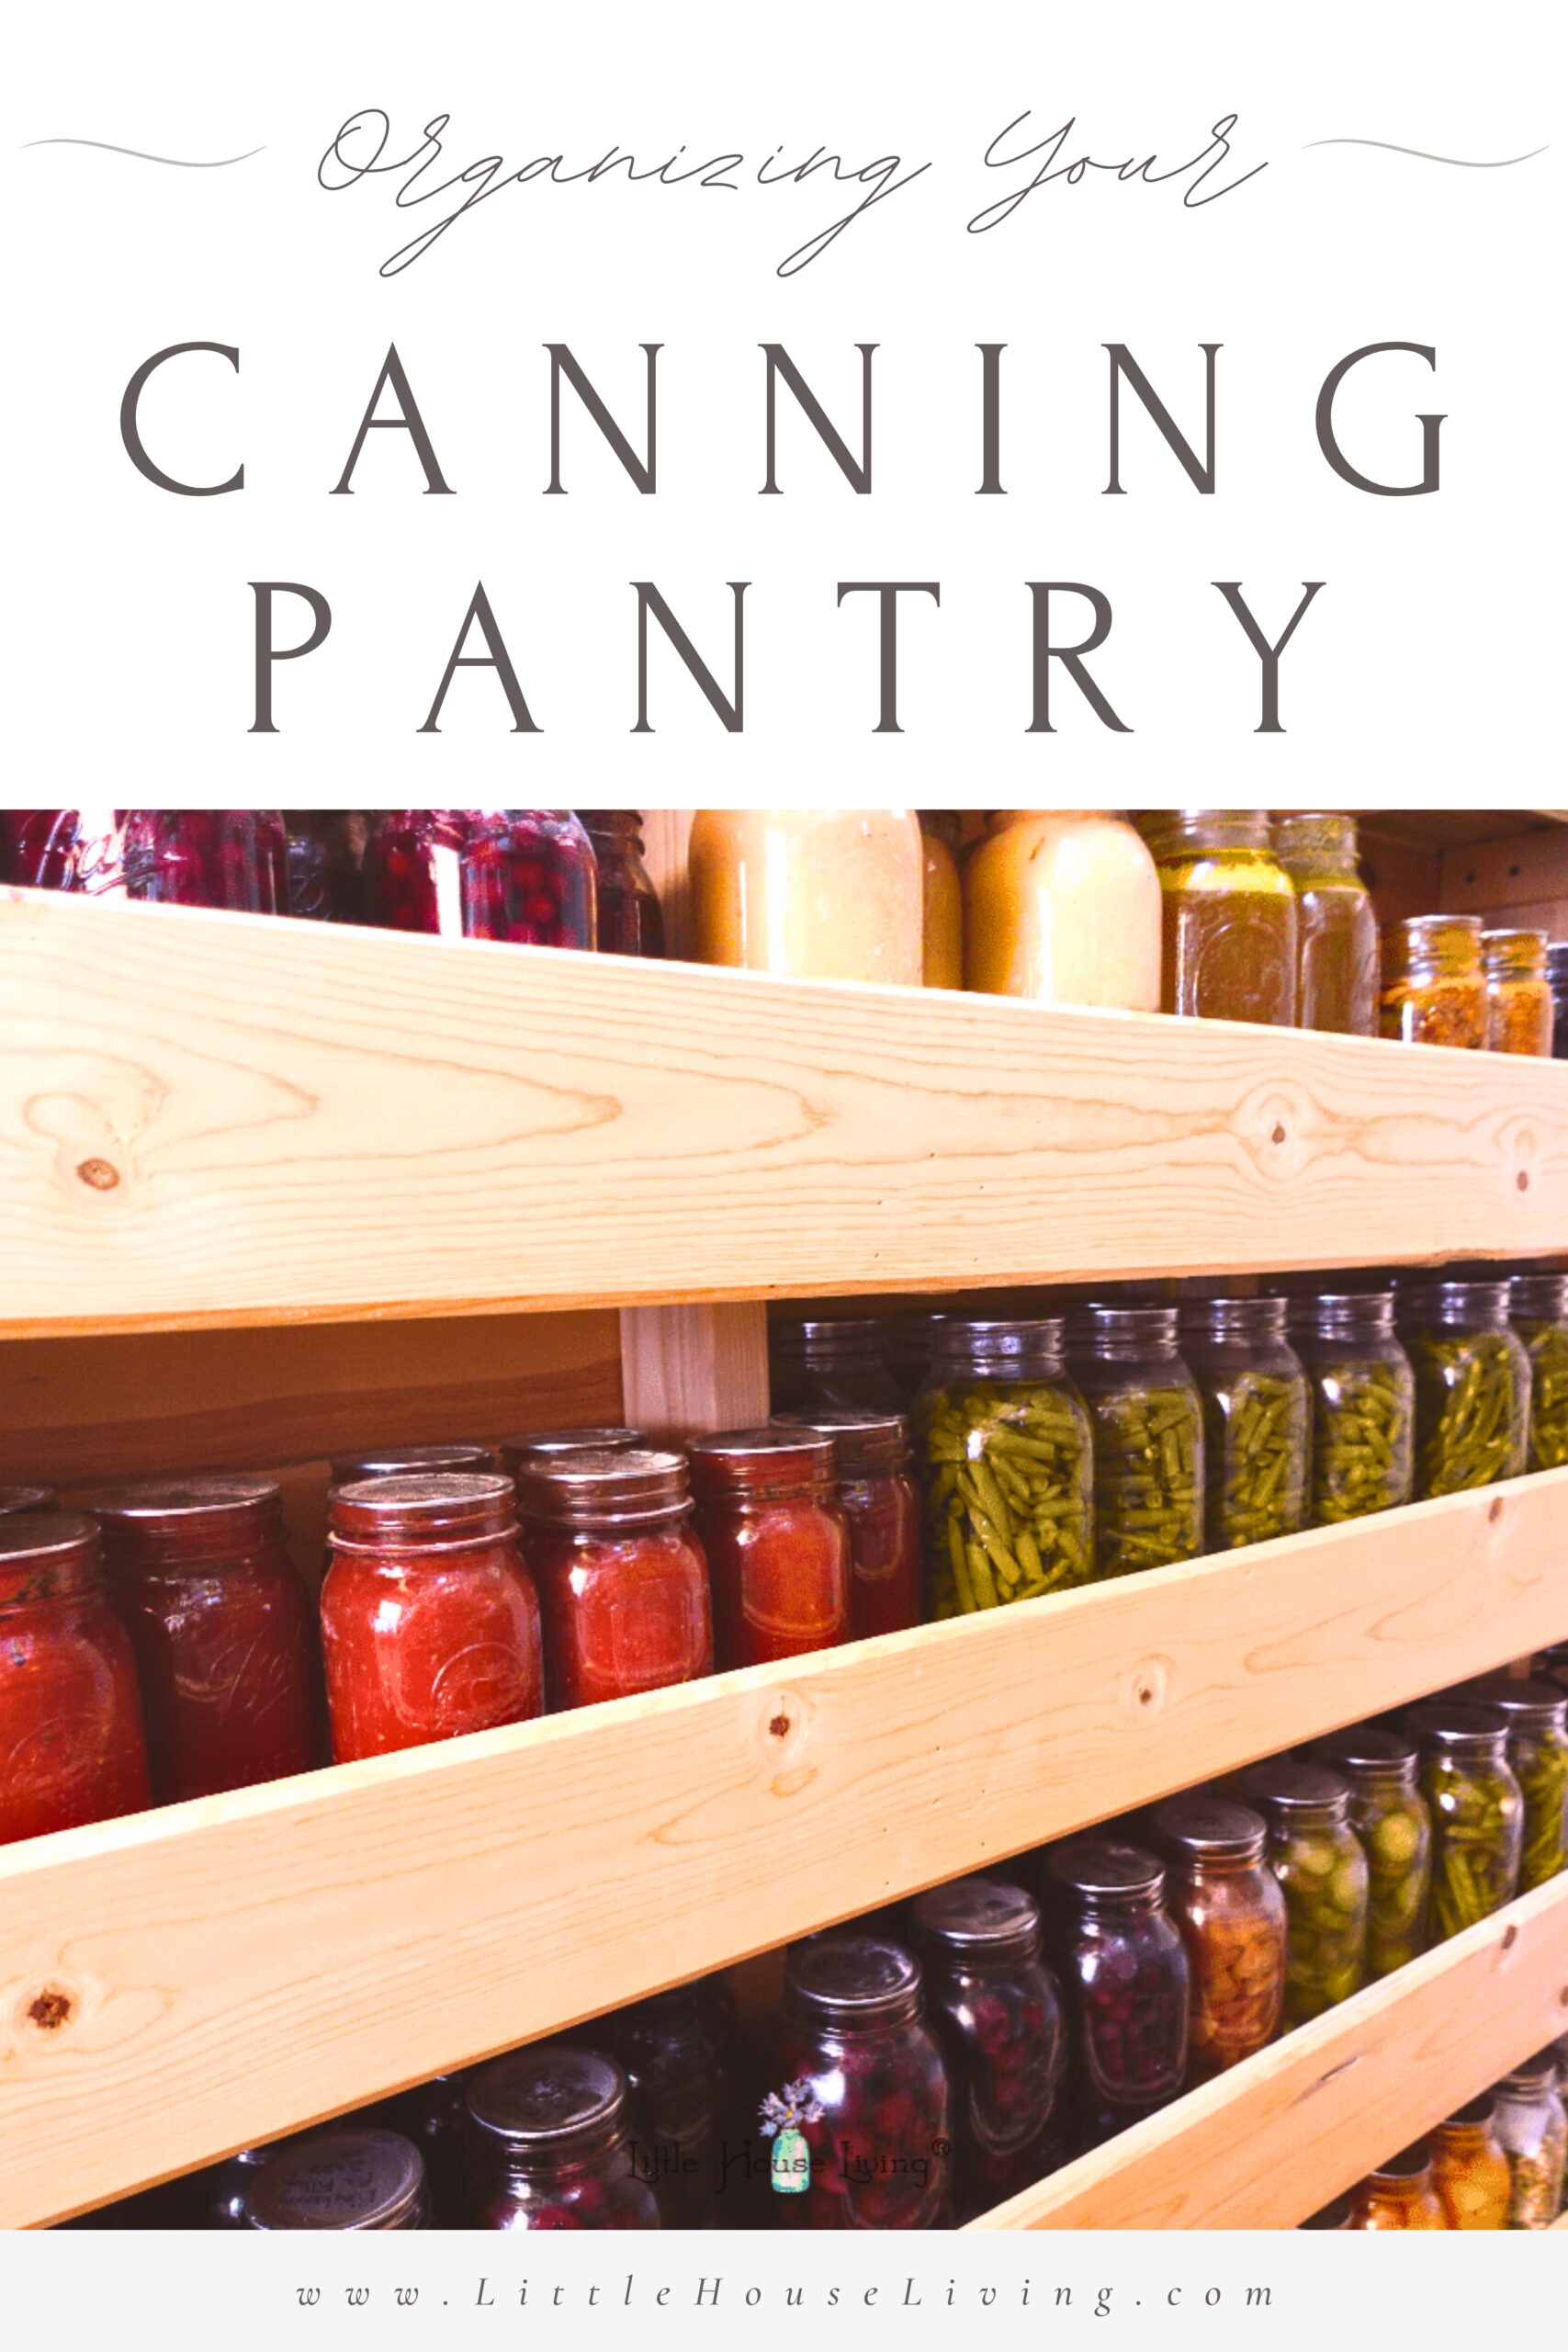 Are you looking for ways to organize your canning pantry? This Free Canning Inventory Printable will help you keep track of your canned goods.